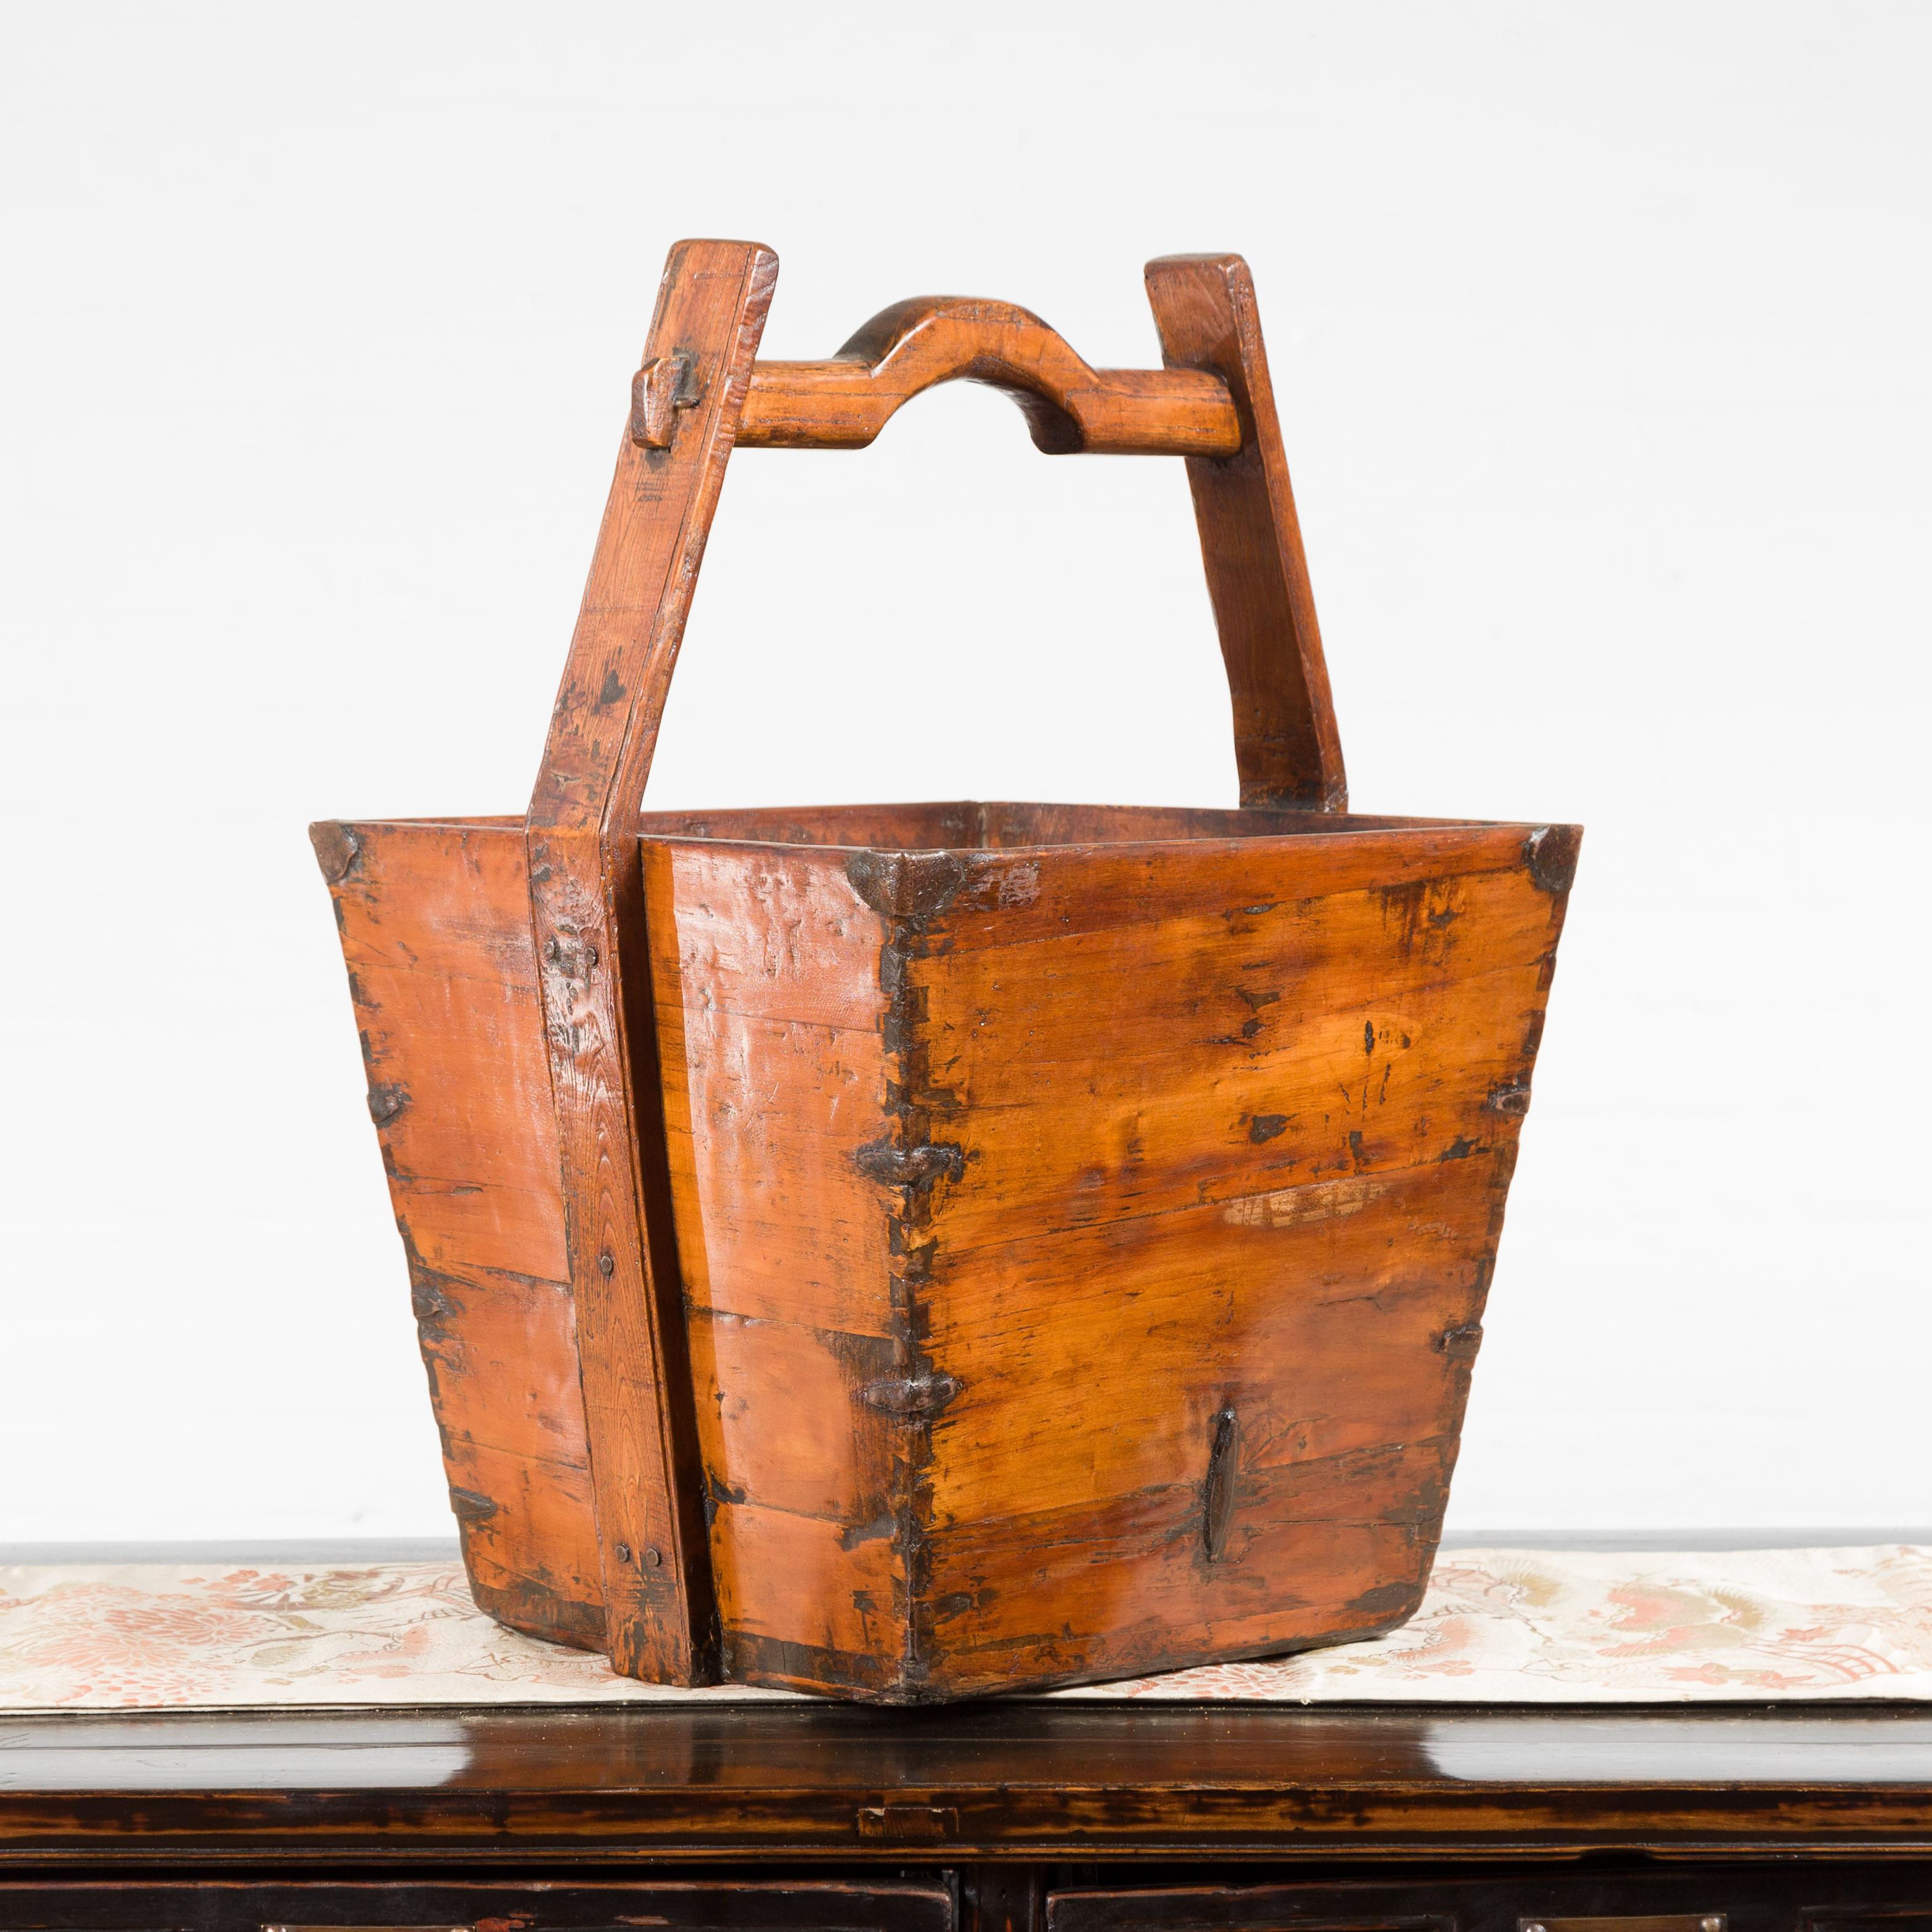 A Chinese vintage wooden grain basket from the mid-20th century, with large handle and metal braces. Created in China during the mid-century period, this grain basket features a nicely tapered body, accented with metal braces in the corners and